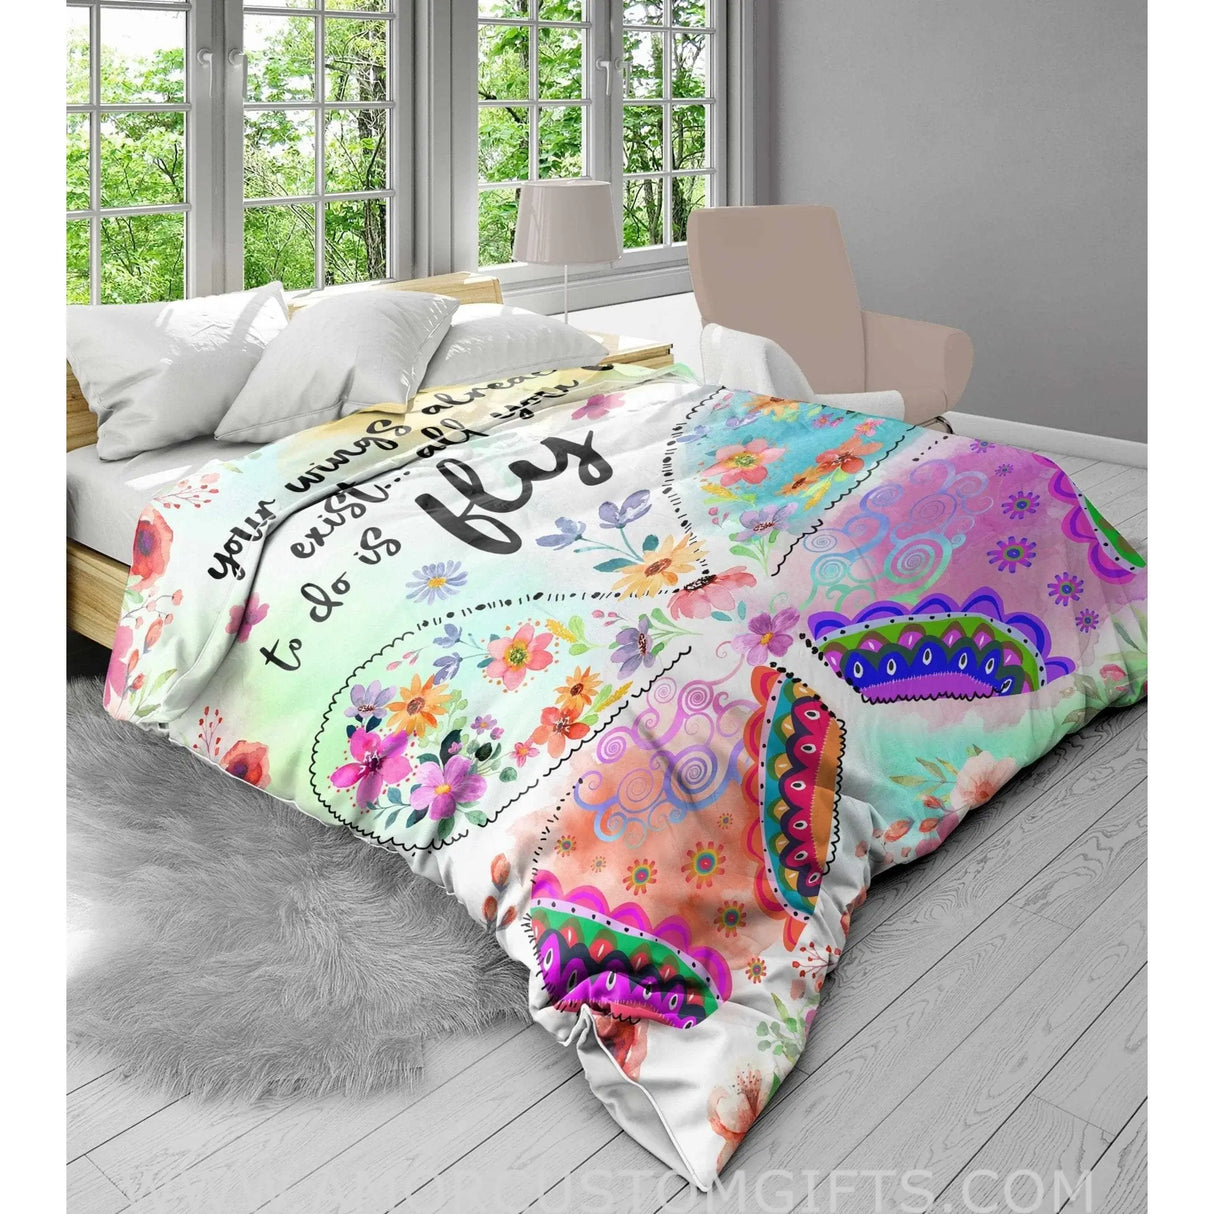 Blankets Your Wings Already Exist All You Have To Do Is Fly Blanket, Personalized Custom Fleece Blanket,  Customized Blanket